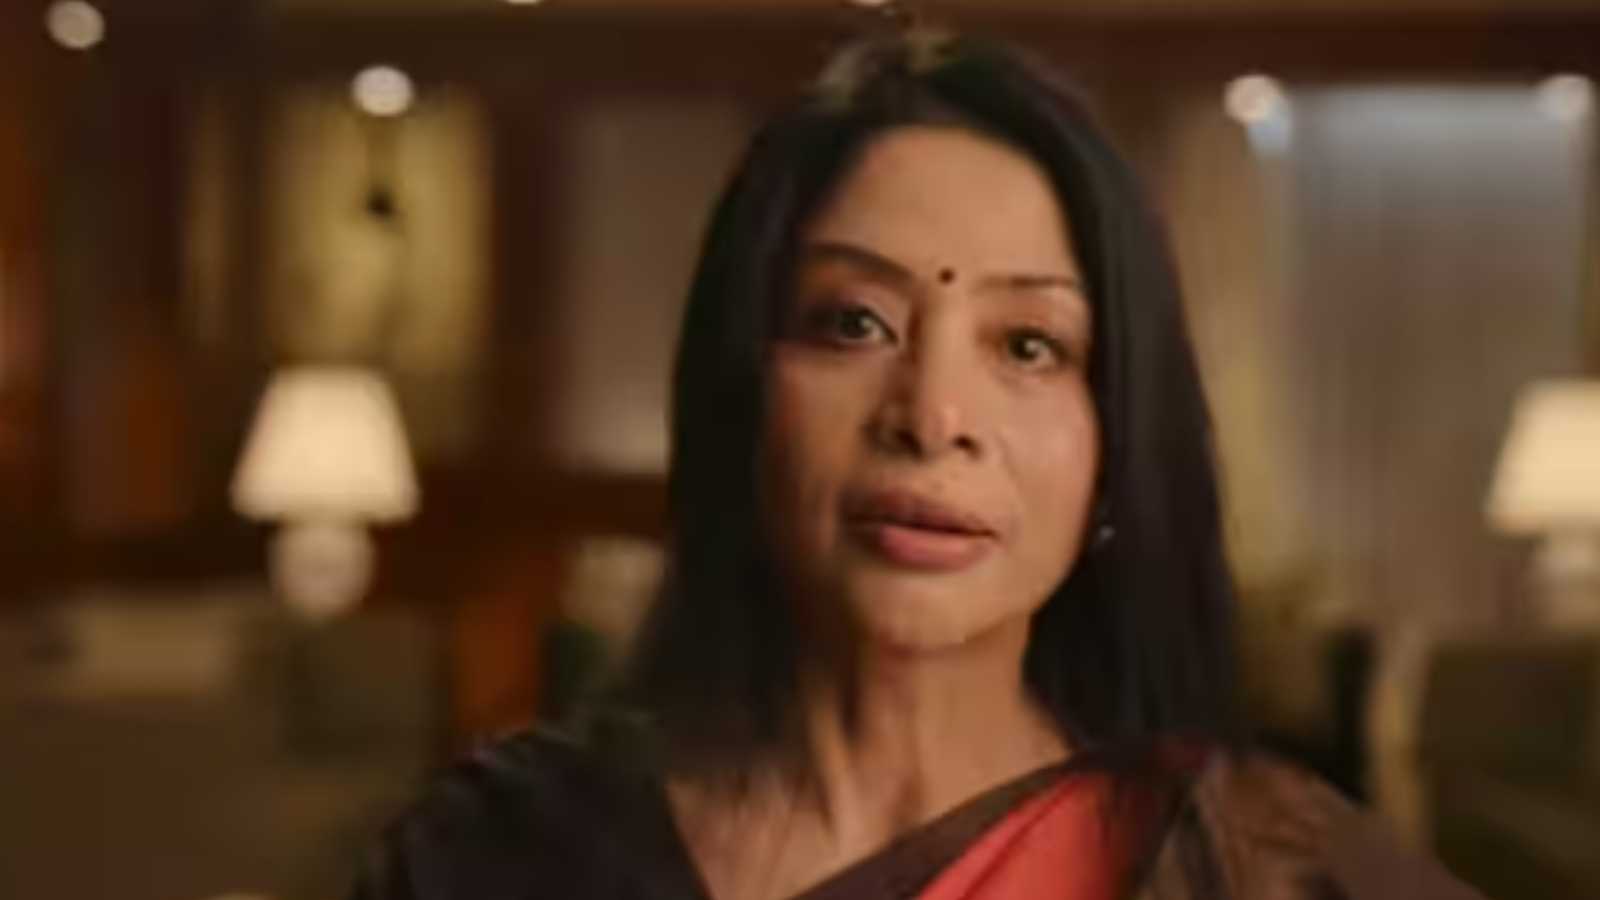 The Indrani Mukerjea Story: Buried Truth - Here's everything you need to know about the Netflix documentary